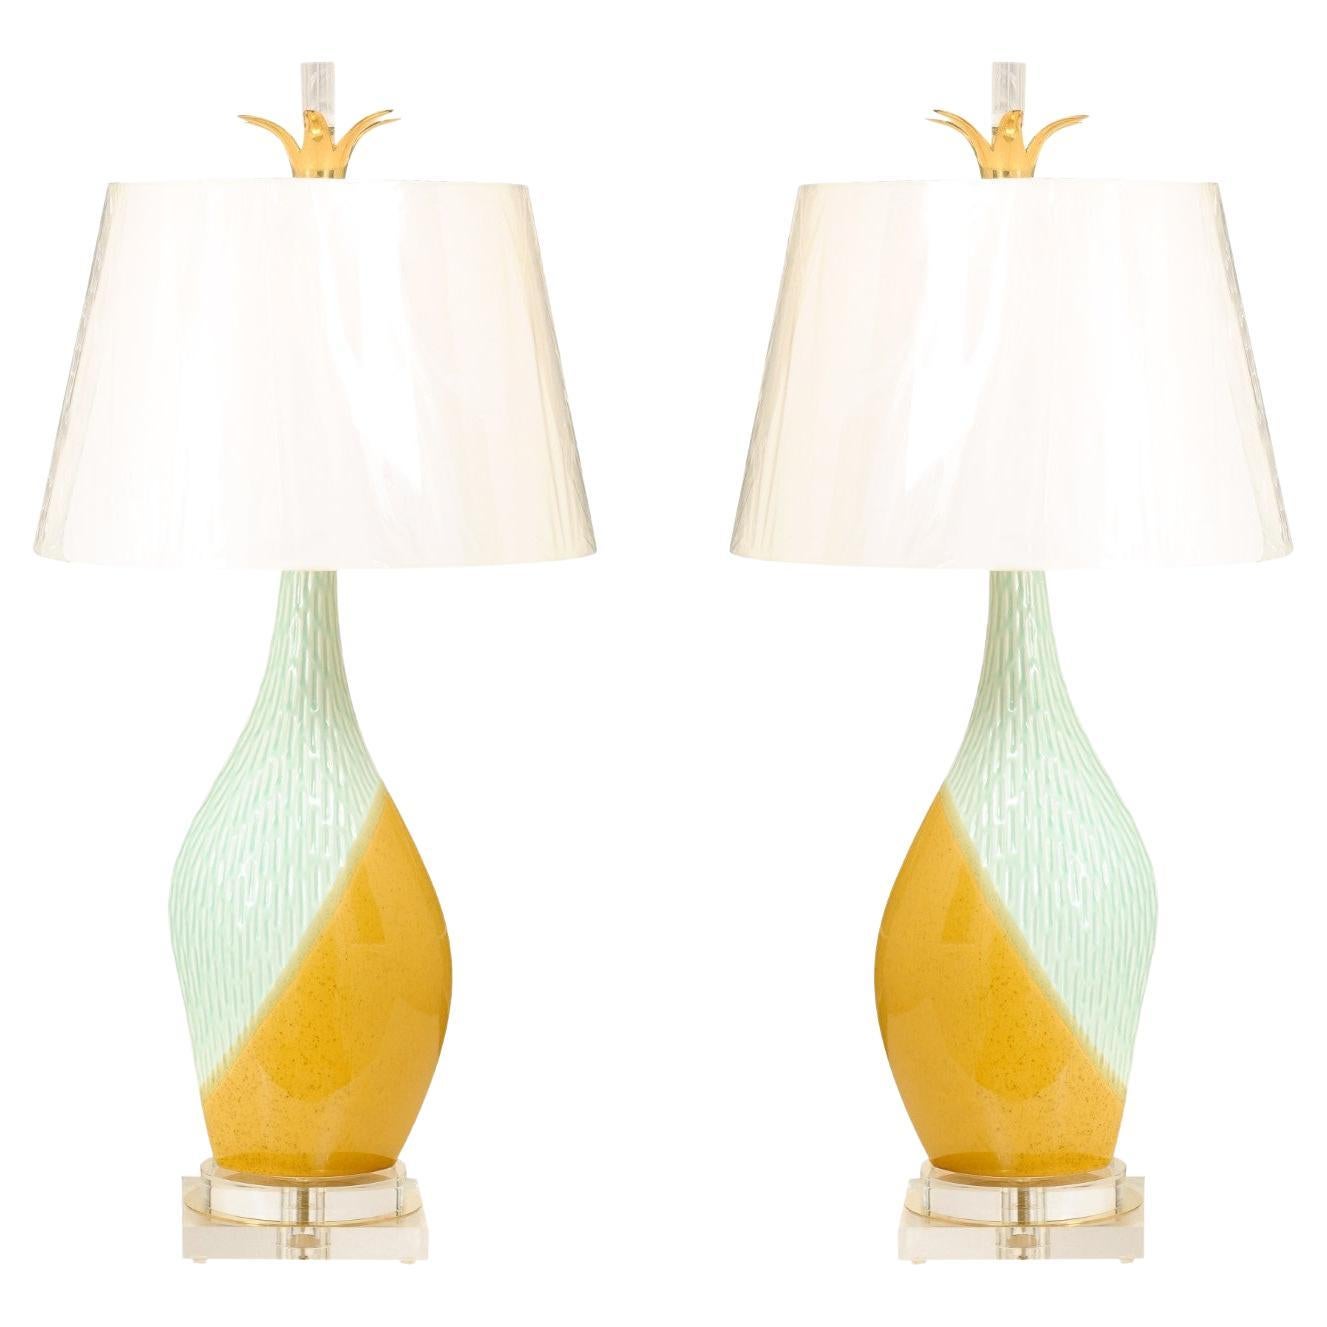 Dazzling Pair of Portuguese Ceramic Lamps in Yellow Ochre and Sultanabad Blue